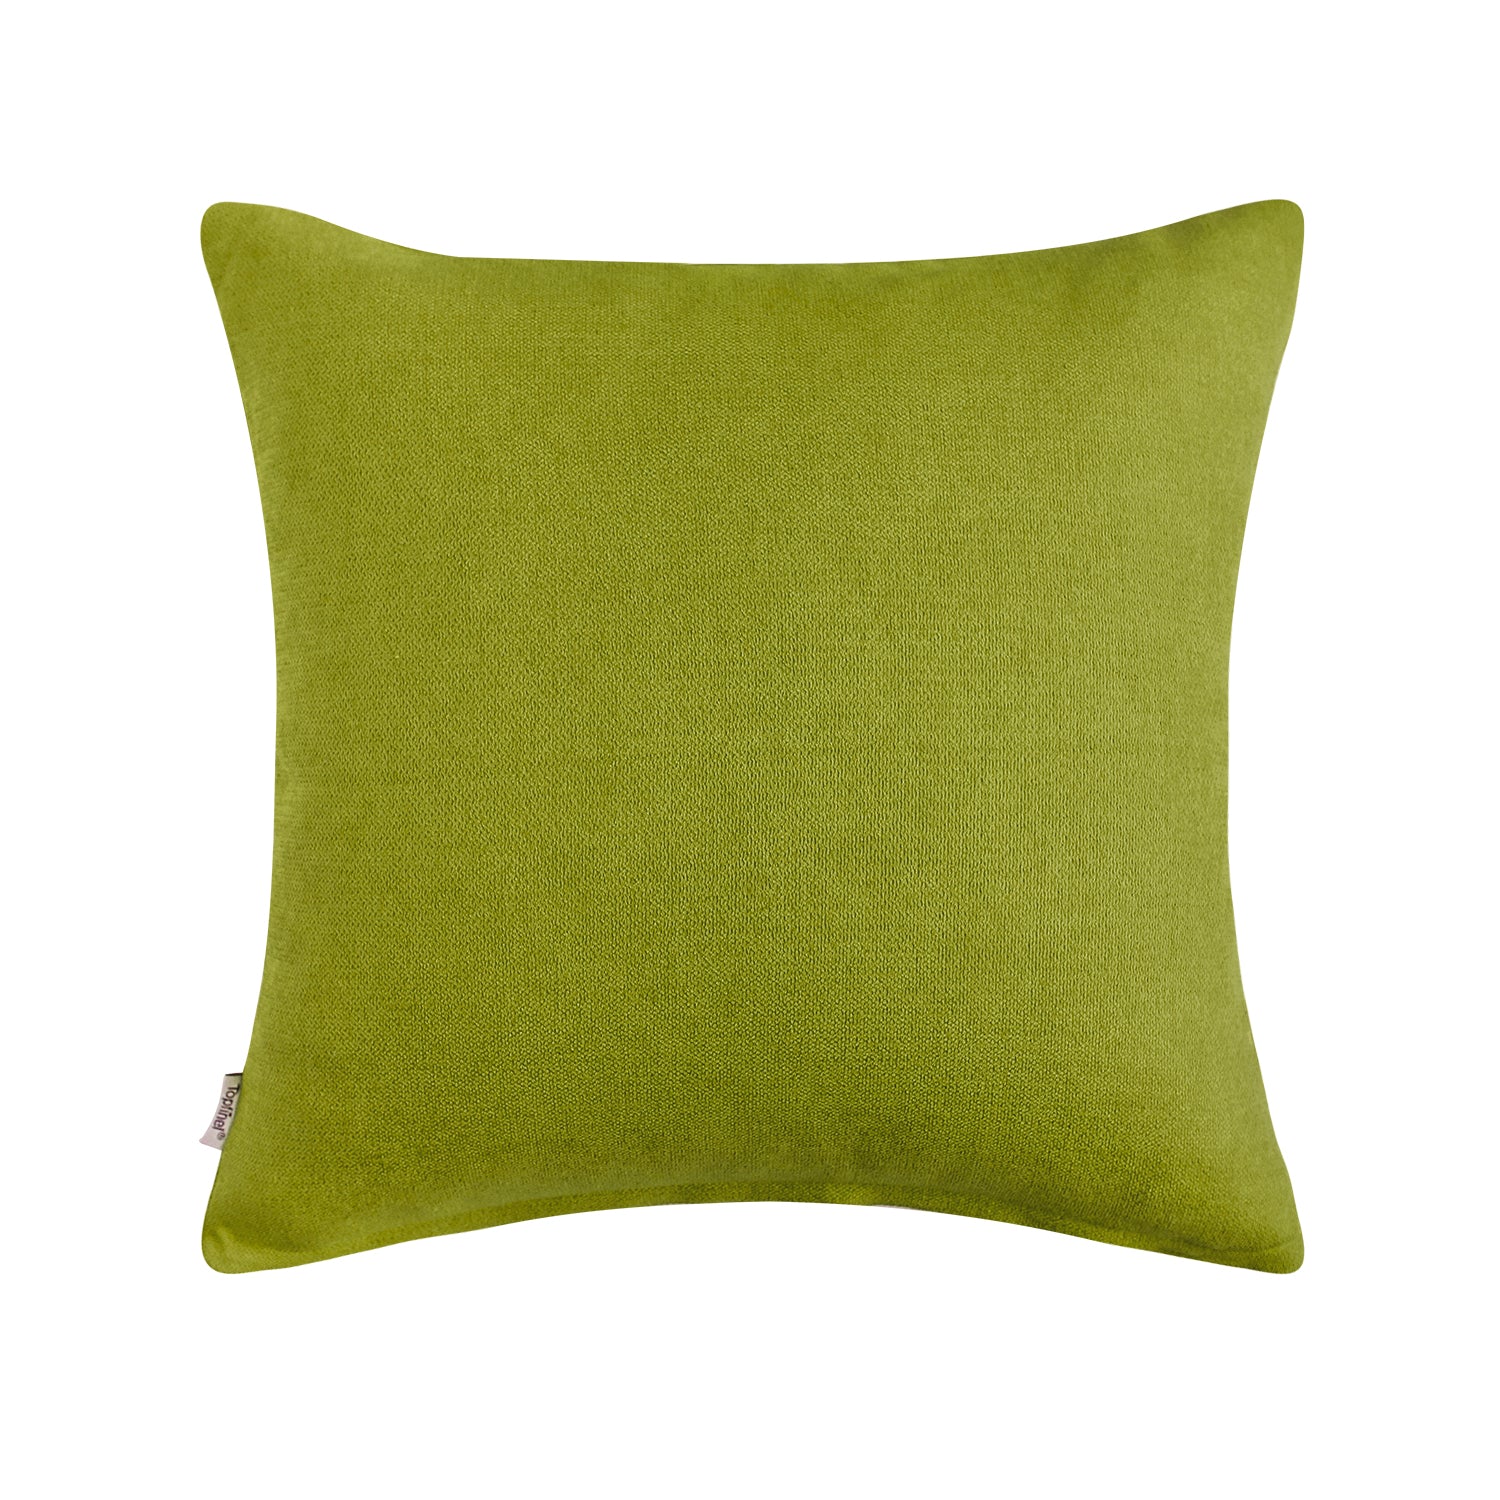 Chenille Pillow Covers Bedroom Decoration Square Solid Color